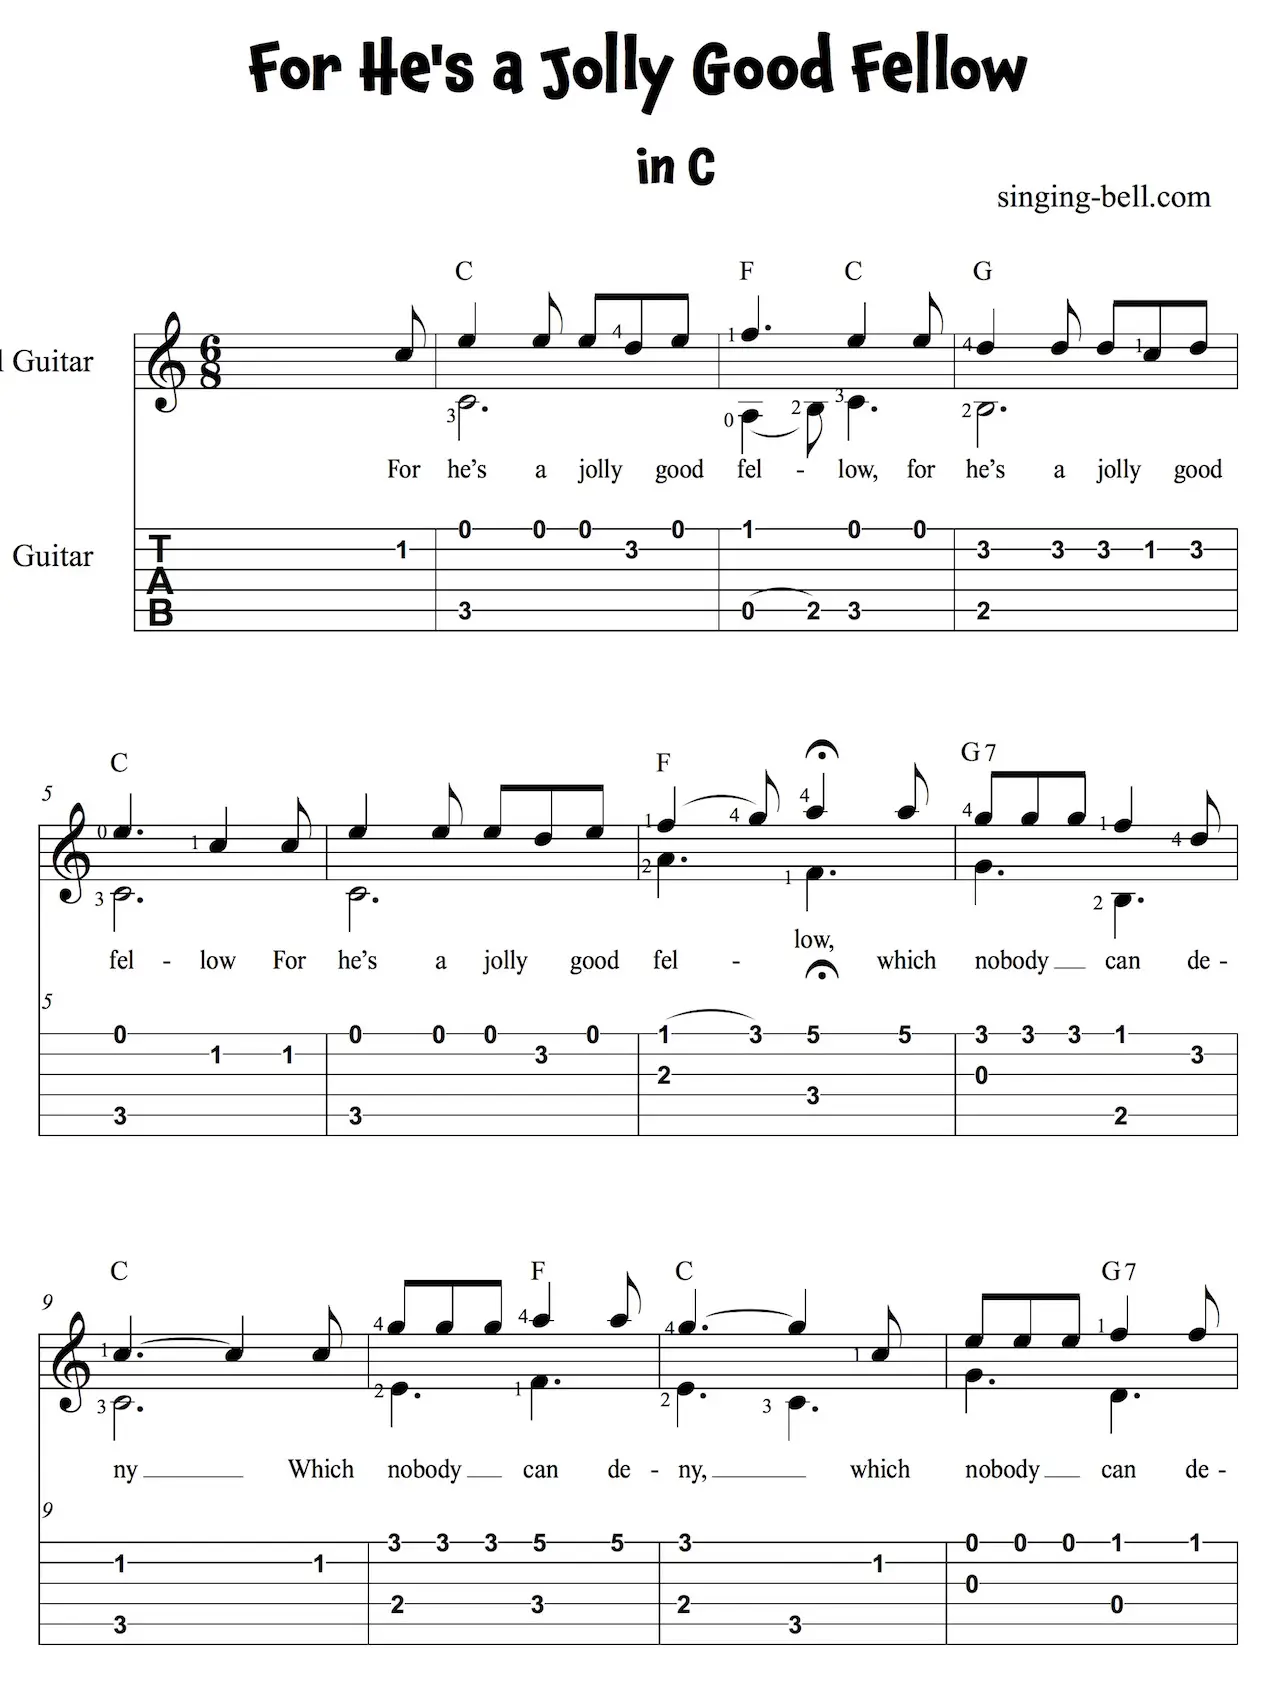 For He's a Jolly Good Fellow Easy Guitar Sheet Music with notes and tablature in C.